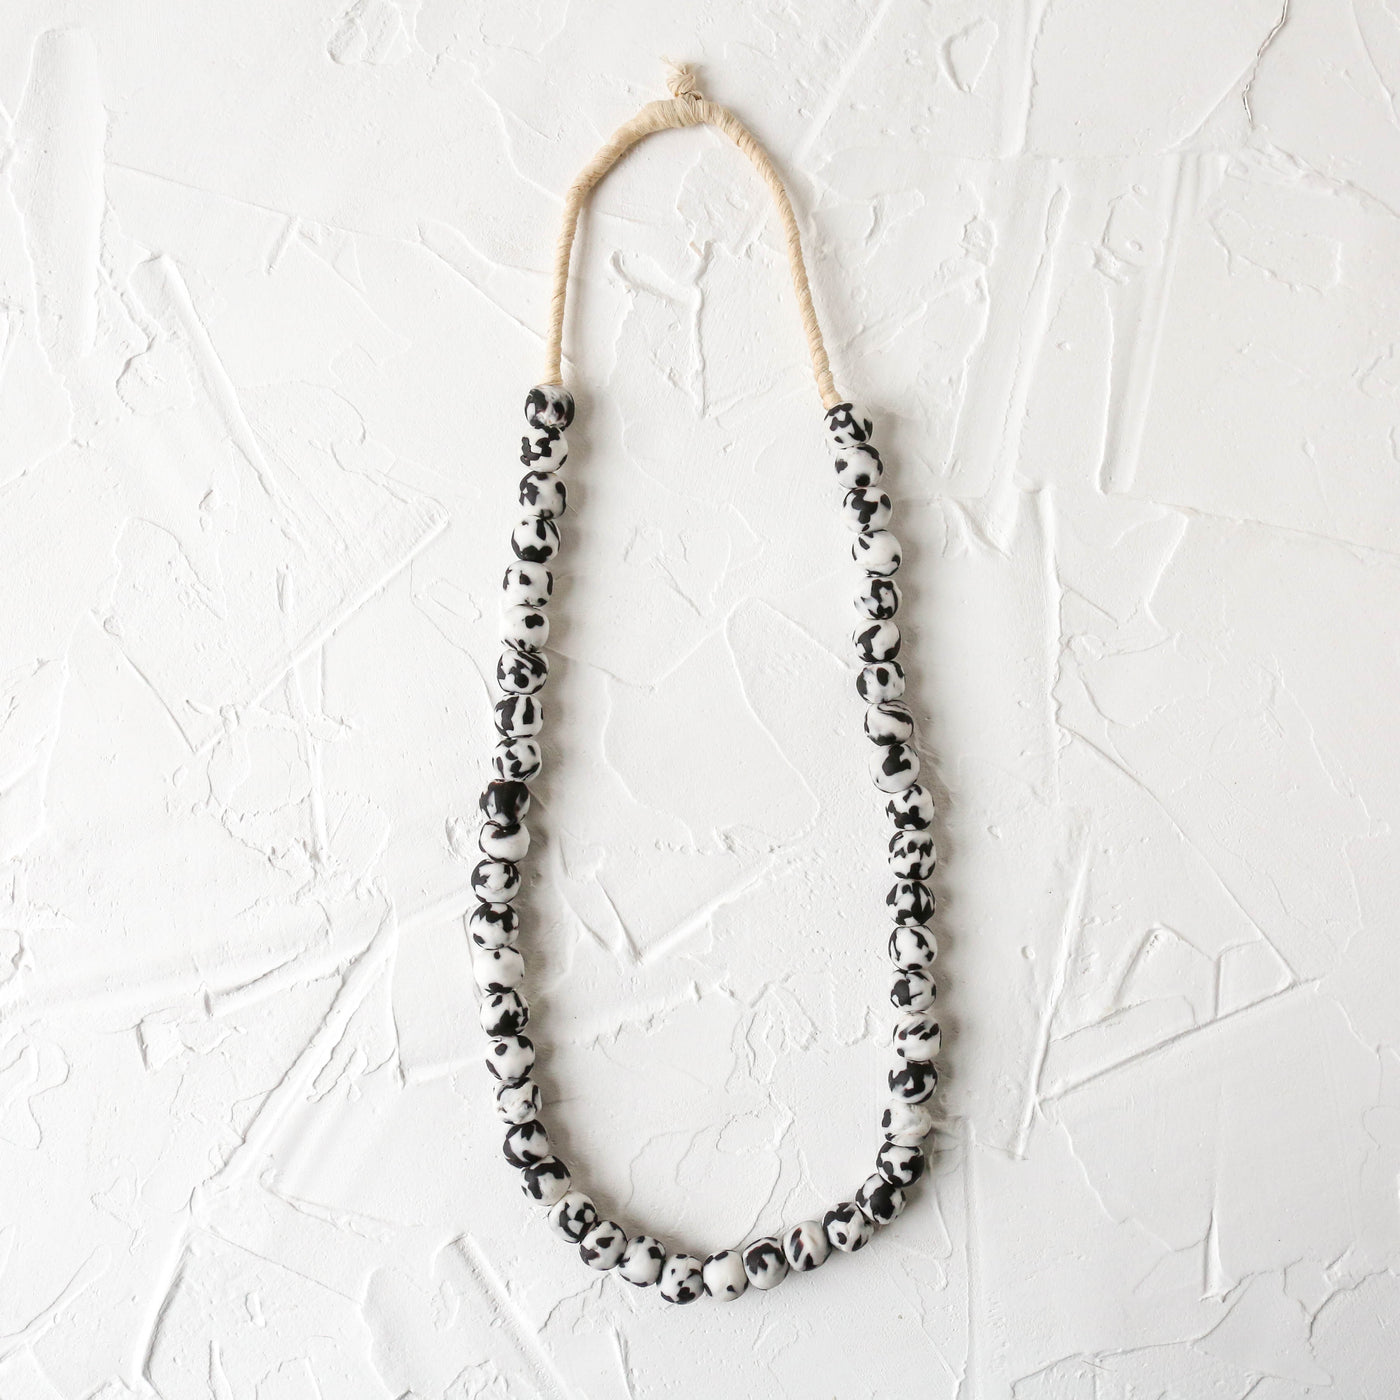 Recycled Glass Beads - 14mm Black & White Patterned